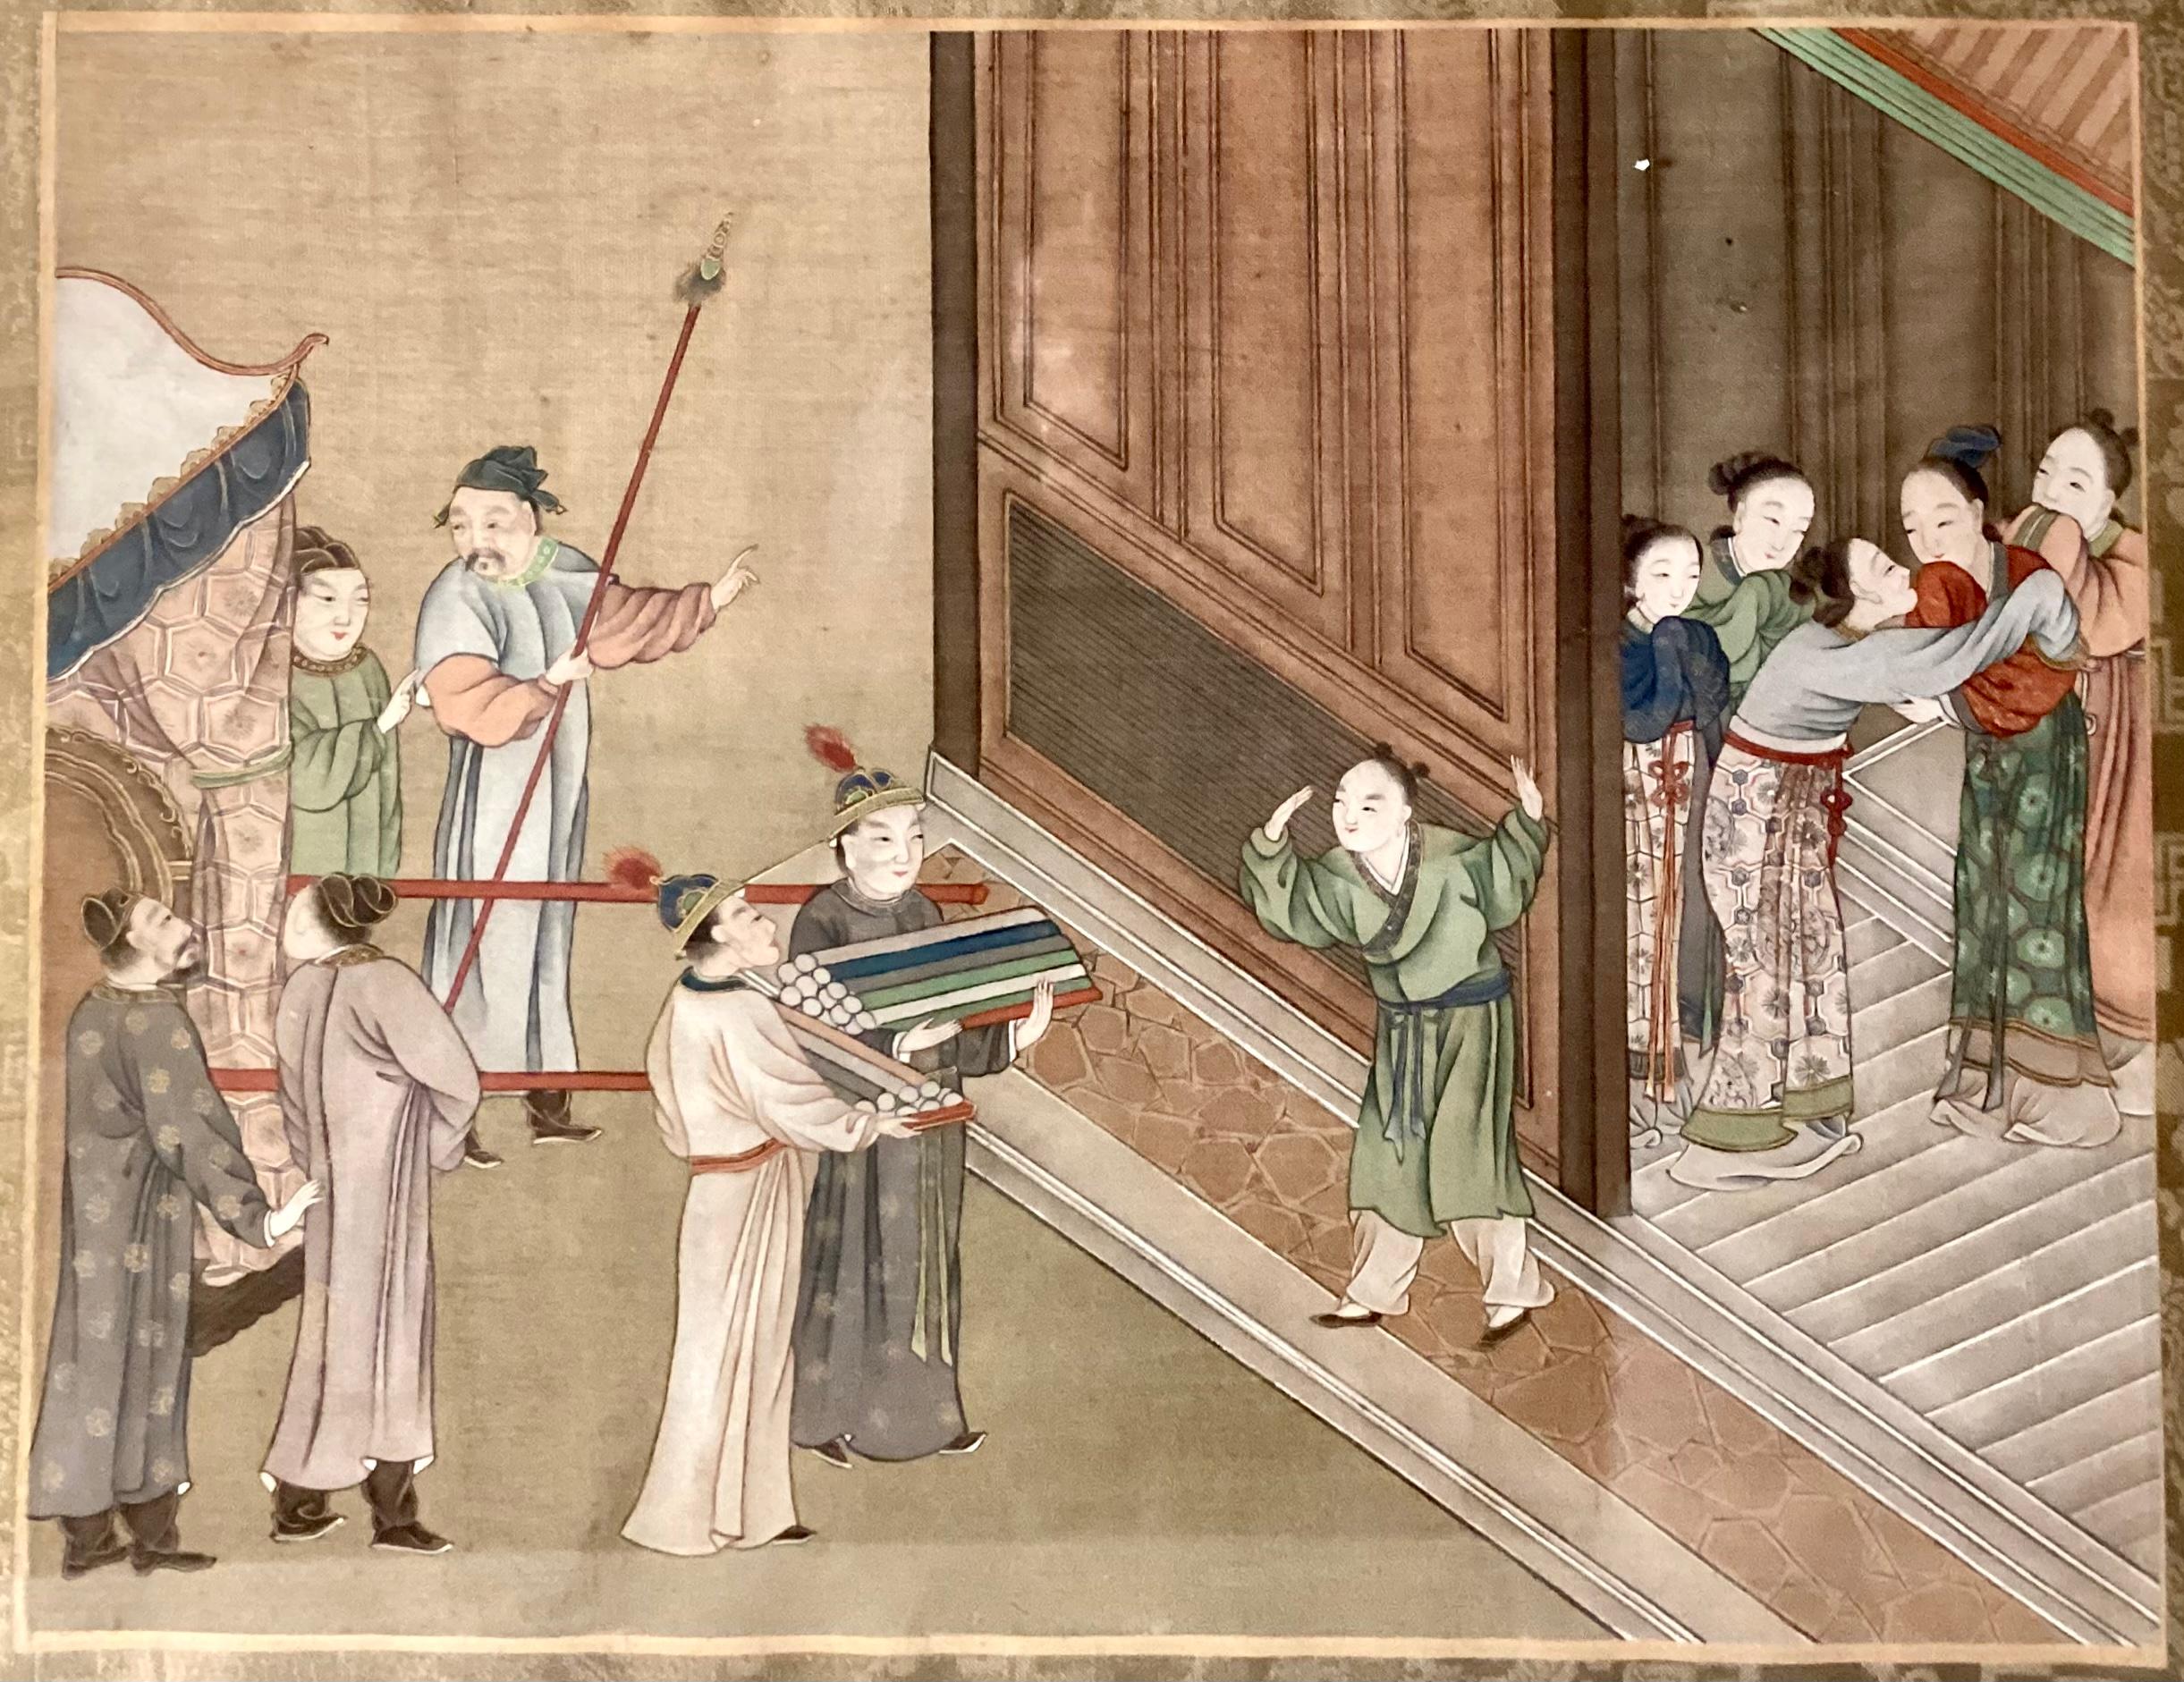 19th century Chinese silk painting. Framed and matted. Features scene of Chinese characters in a ceremony. Beautiful muted colors of green, red, blue and gray.